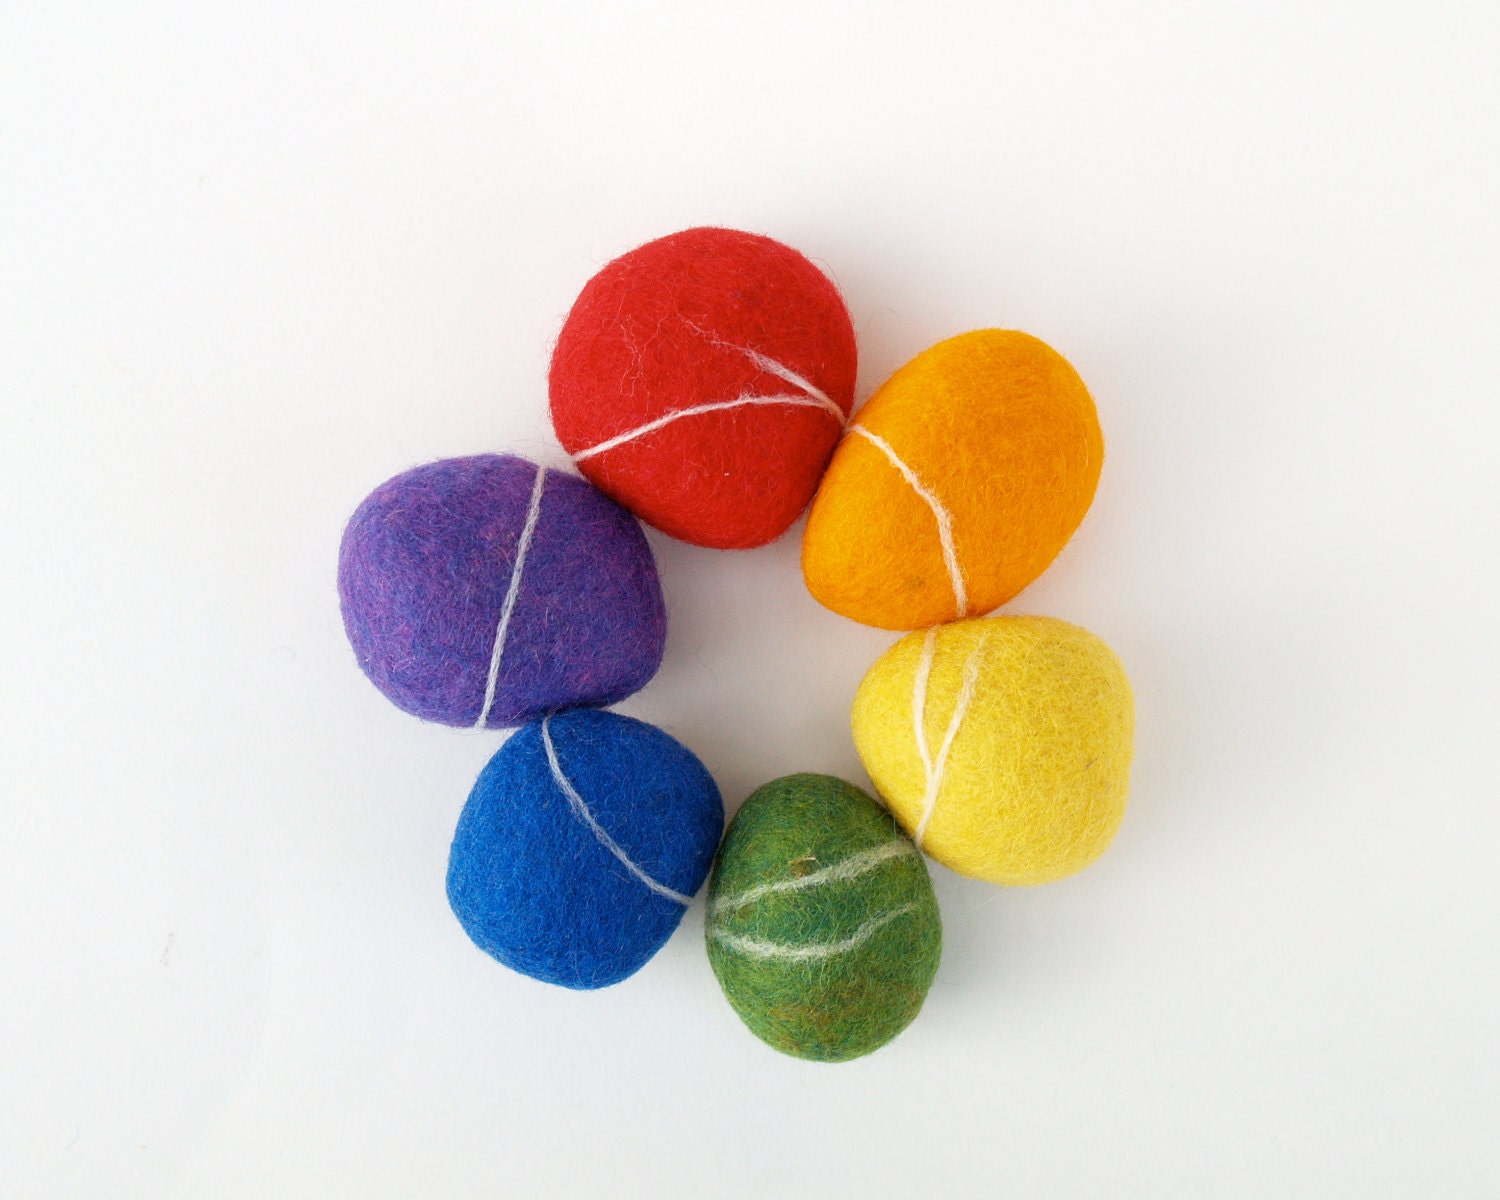 Rainbow Felted Stones, pebbbles rocks wool felt home decor natural dude Christms gift toy urban chic Stocking Stuffer